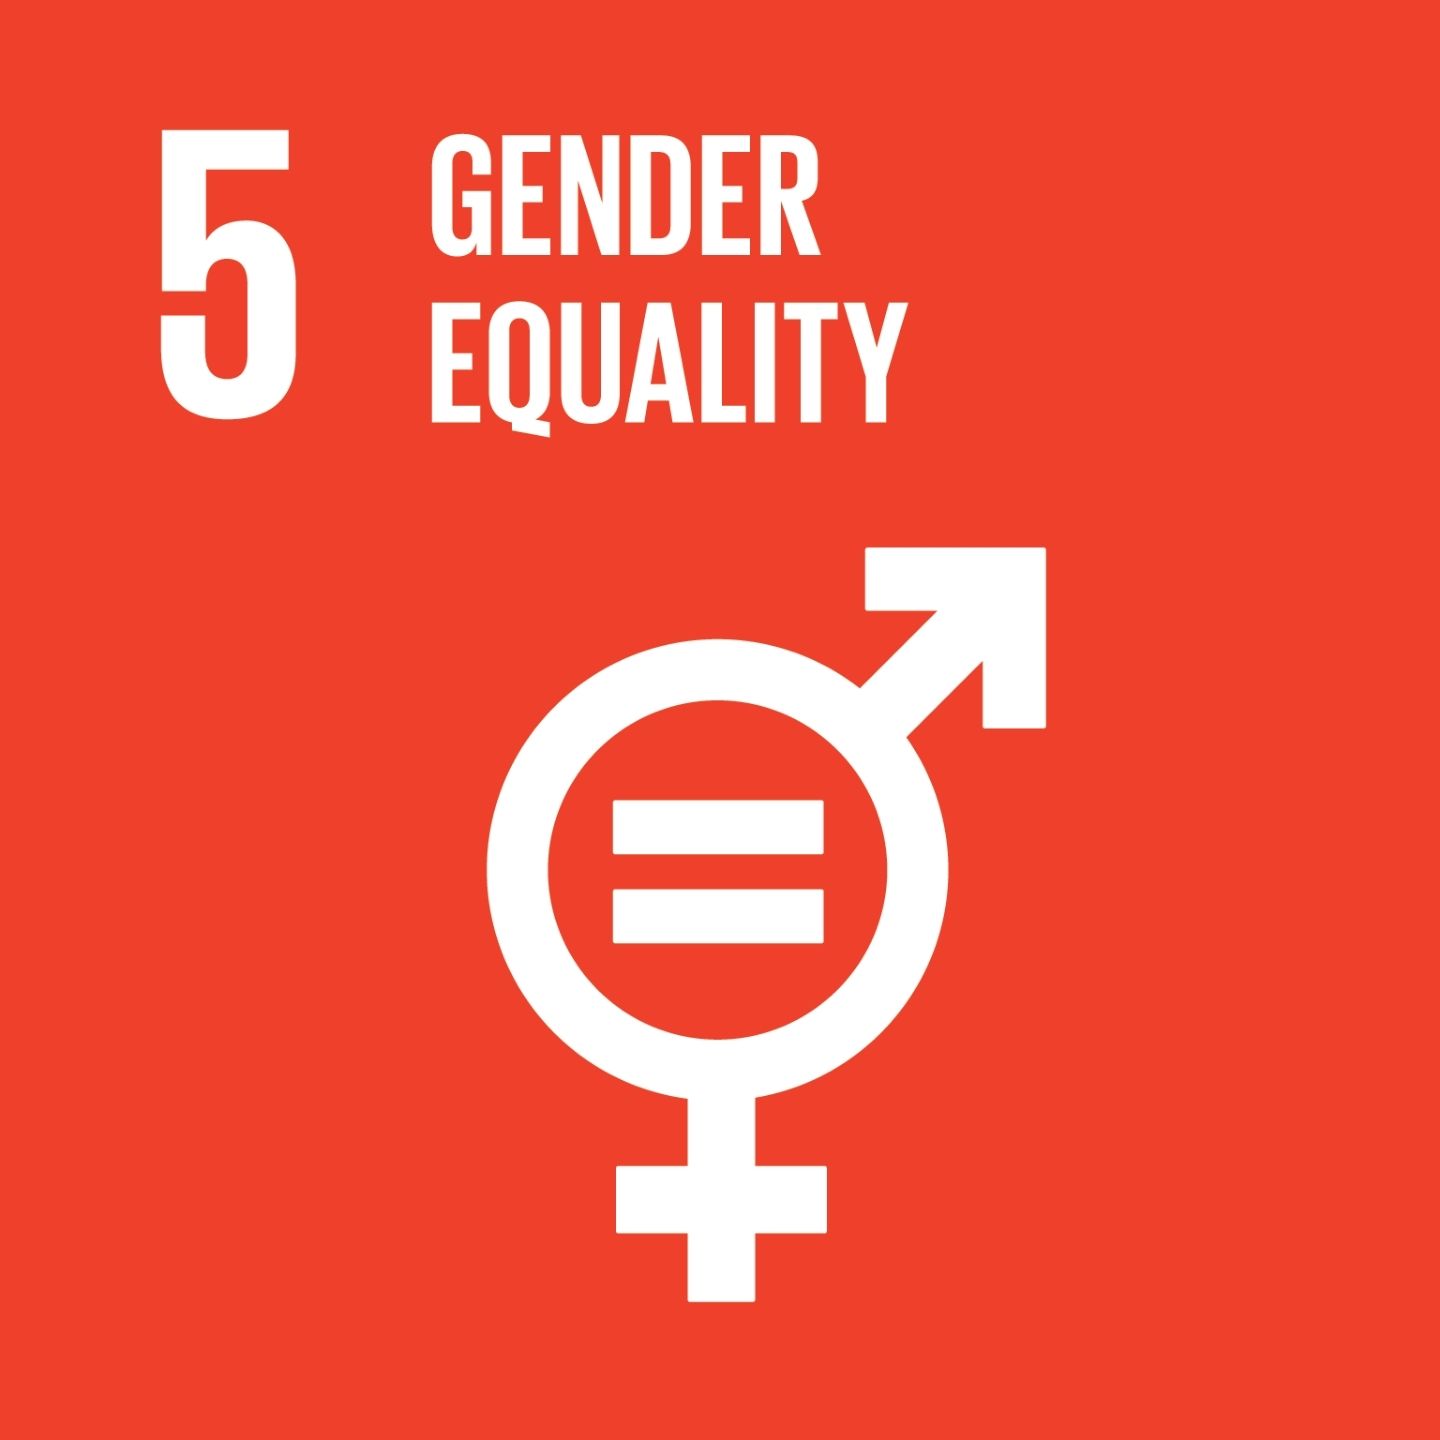 Red image that says '5 Gender Equality'